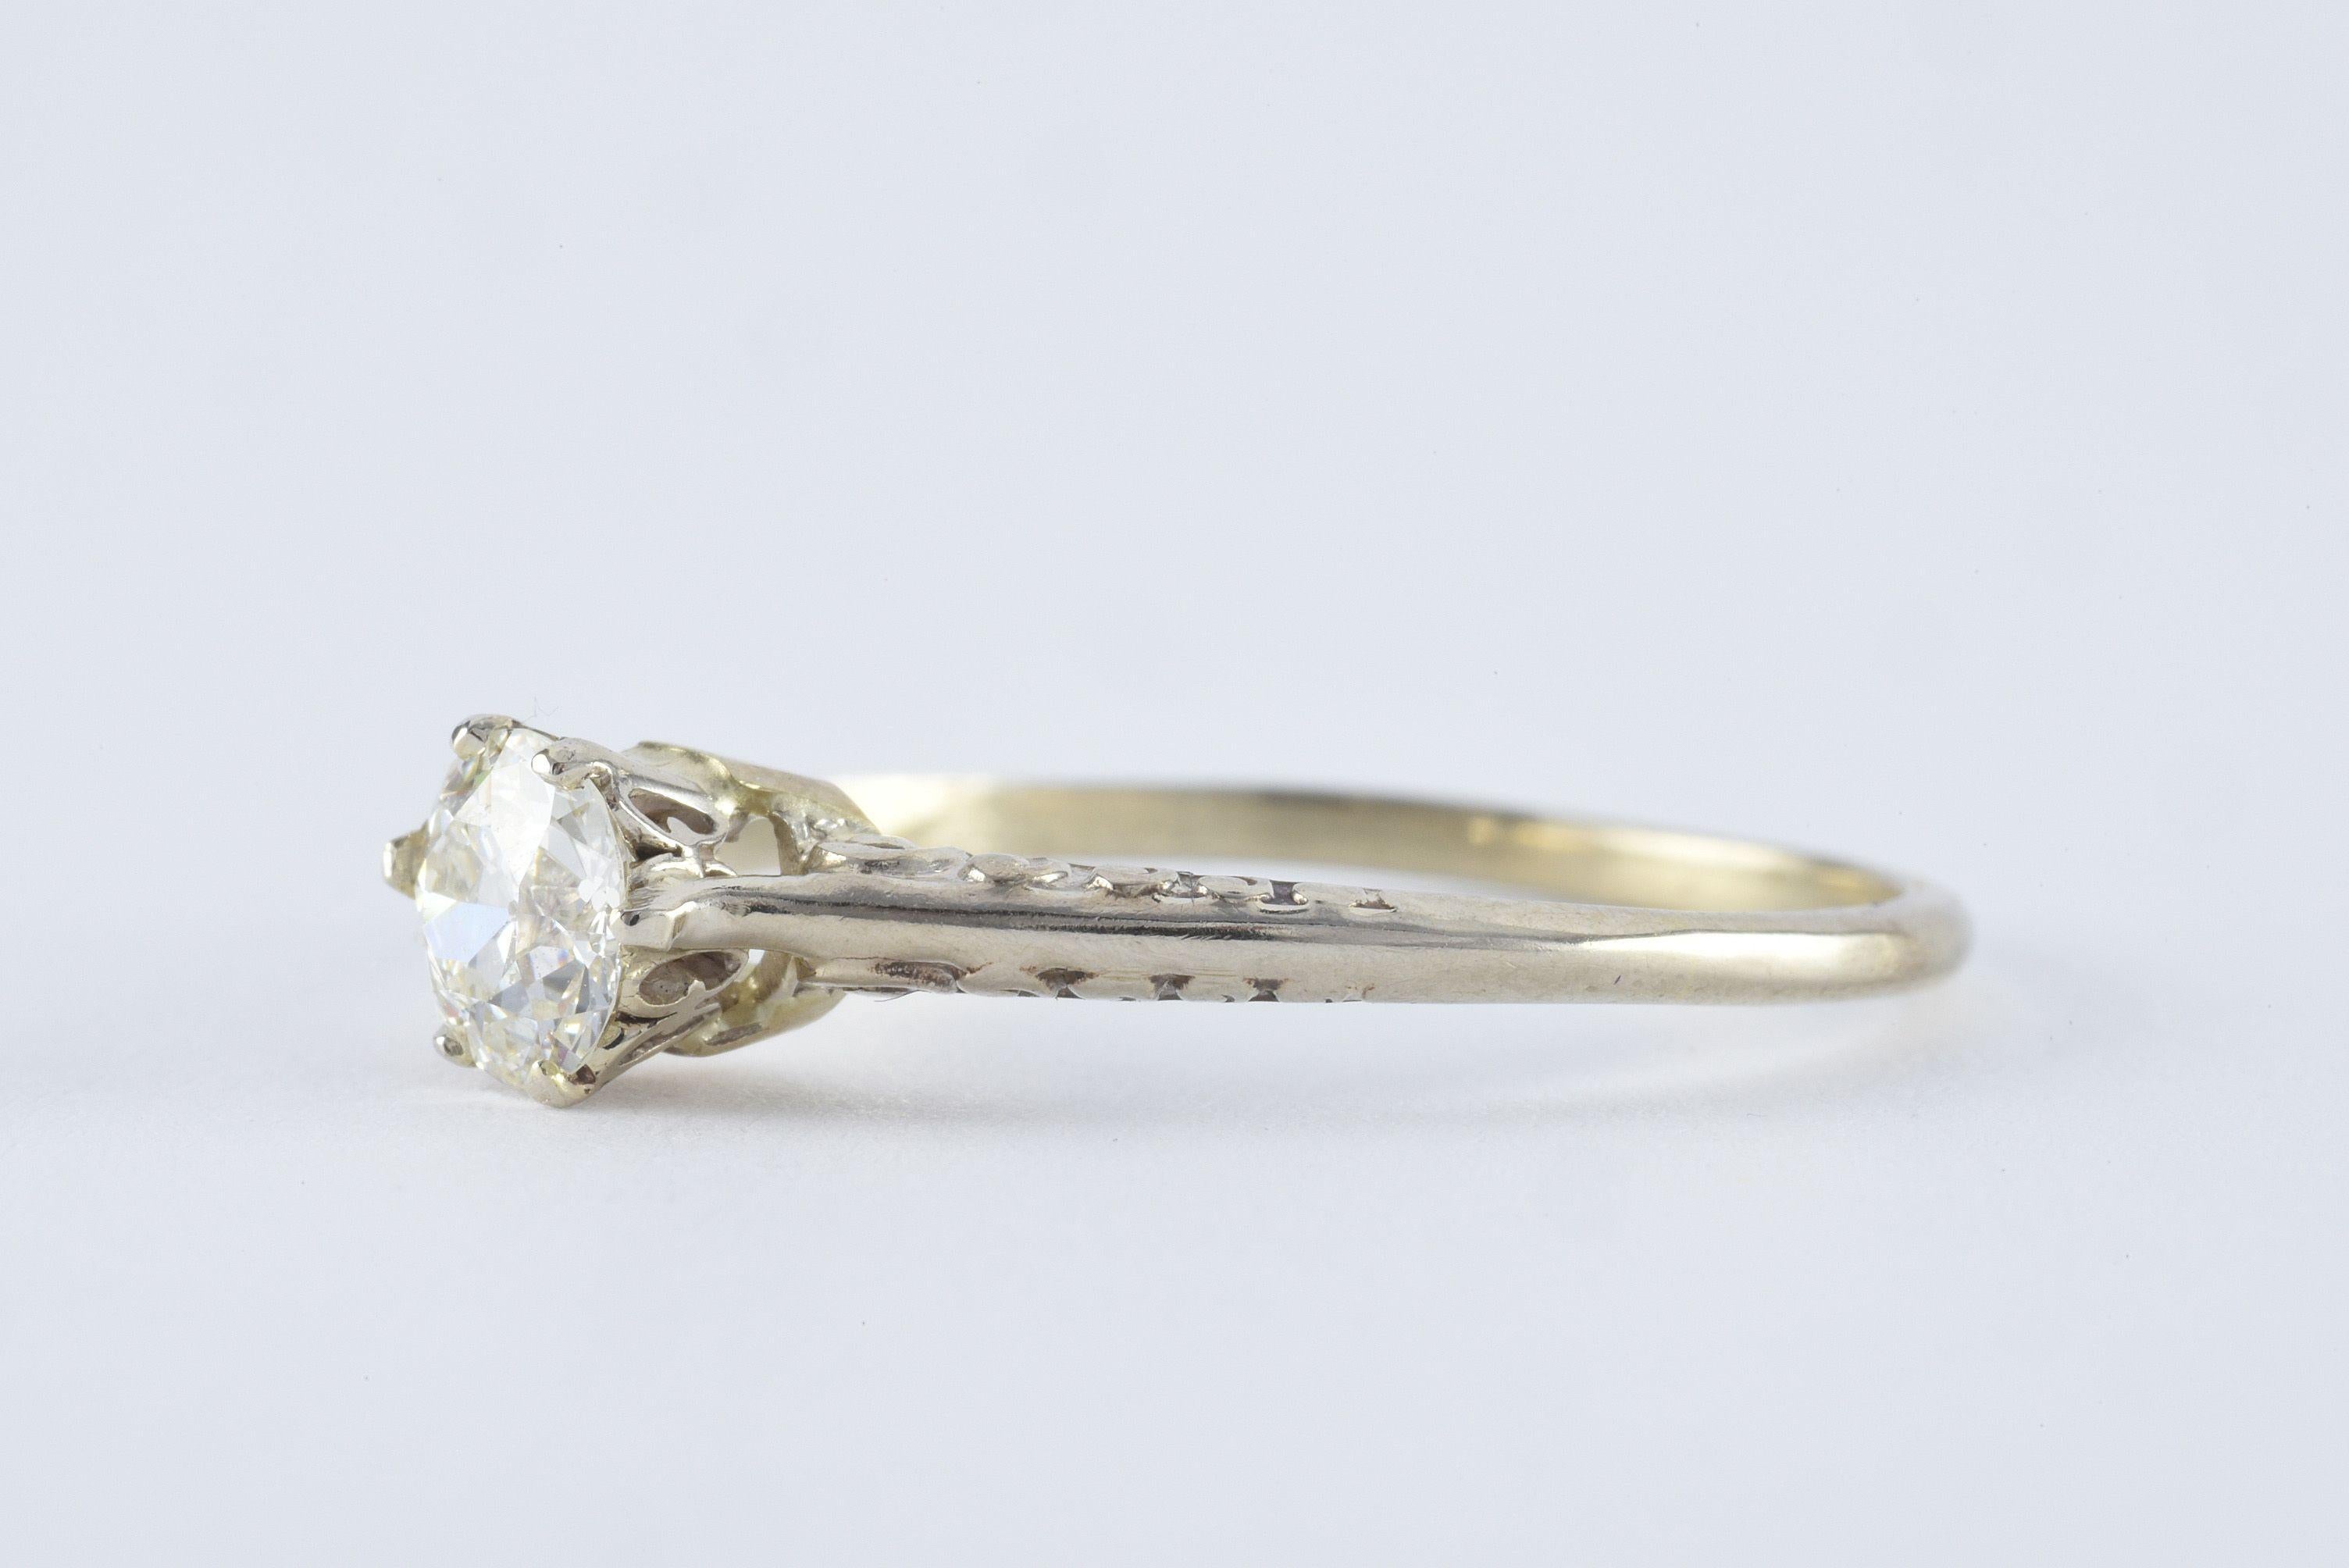 This vintage solitaire engagement band crafted in the 1930-40s is designed around a GIA-certified Old European cut diamond measuring 0.62 carats, J color, SI2 clarity fashioned from 10kt white gold with delicate swirling hand engraved details. 